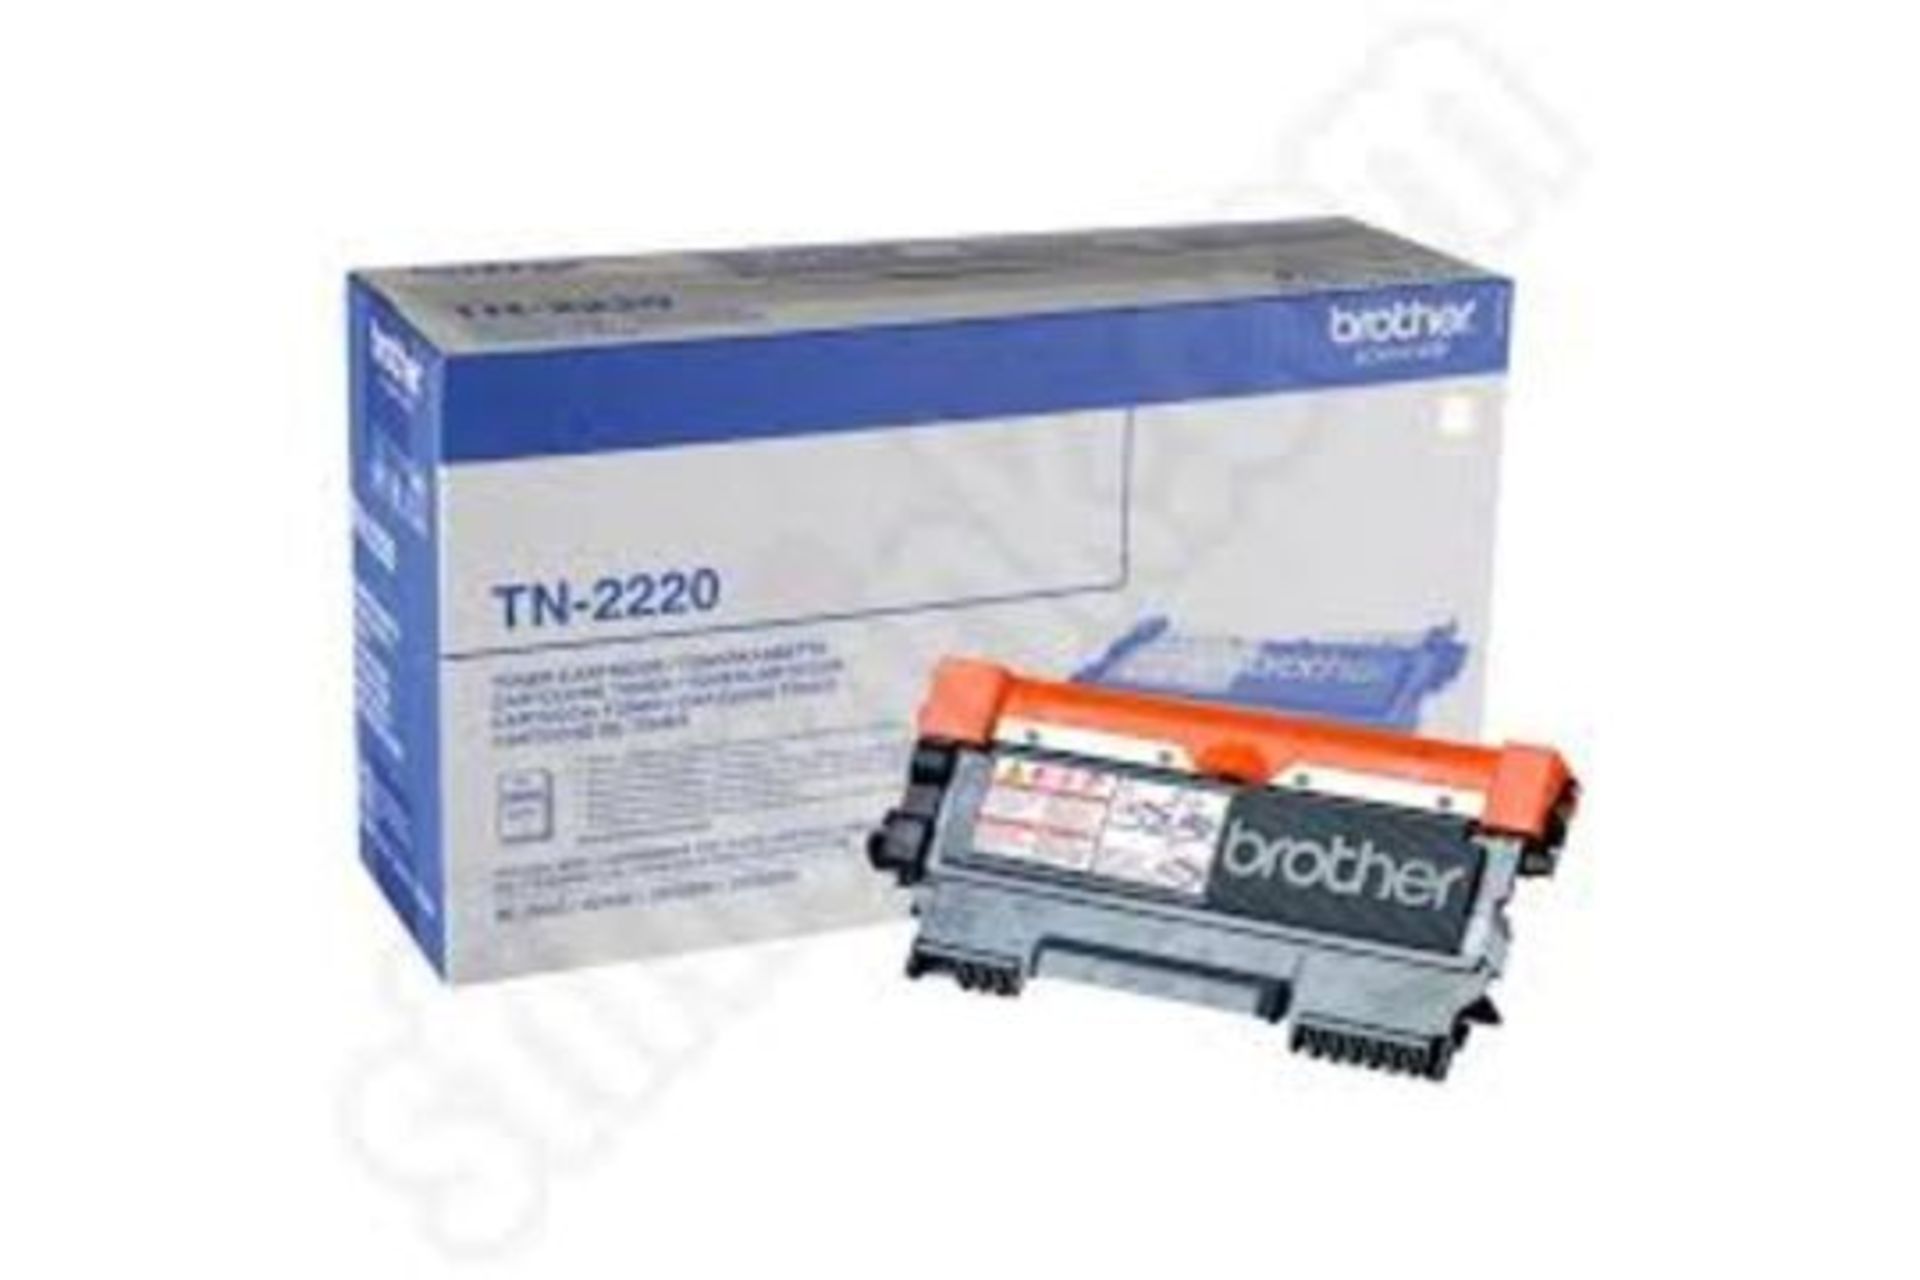 MAJOR LIQUIDATION OF CIRCA 16000 PRINTER CARTRIDGES/TONERS COMPATIBLE WITH BROTHER, EPSON, HP, CANON - Image 7 of 9